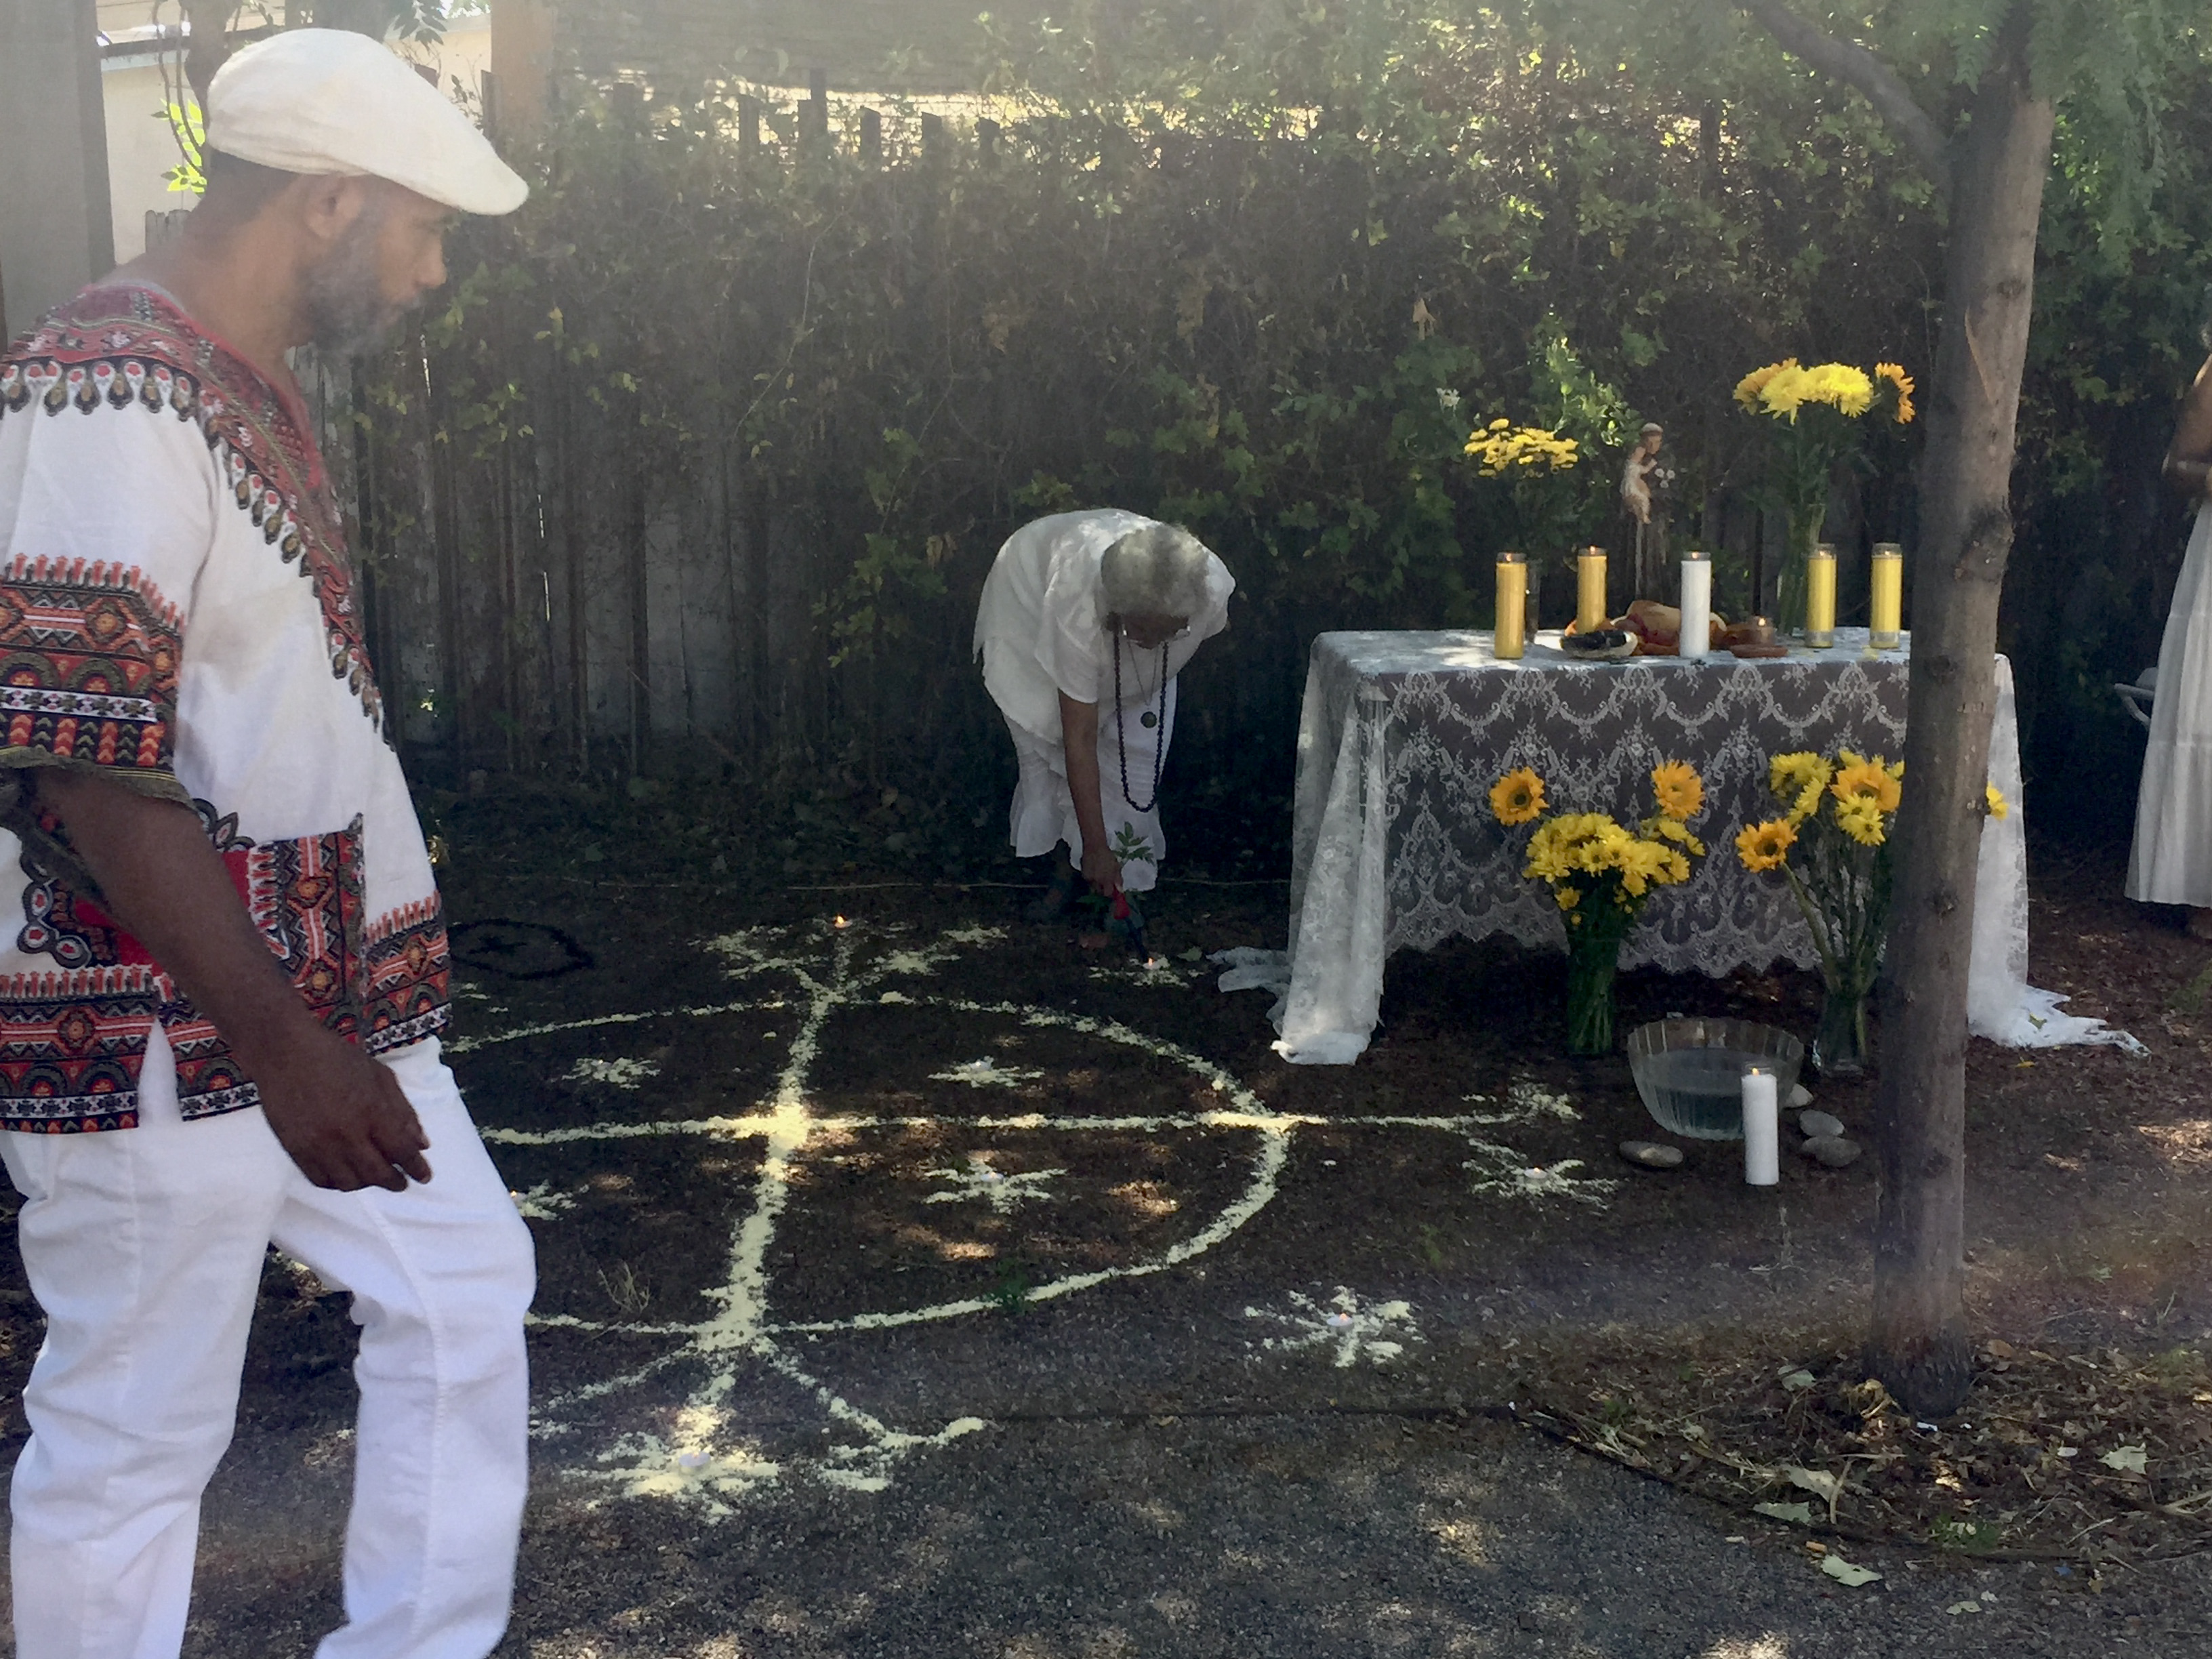 Two People dressed in white at Papa Legba event, altar, yellow flowers